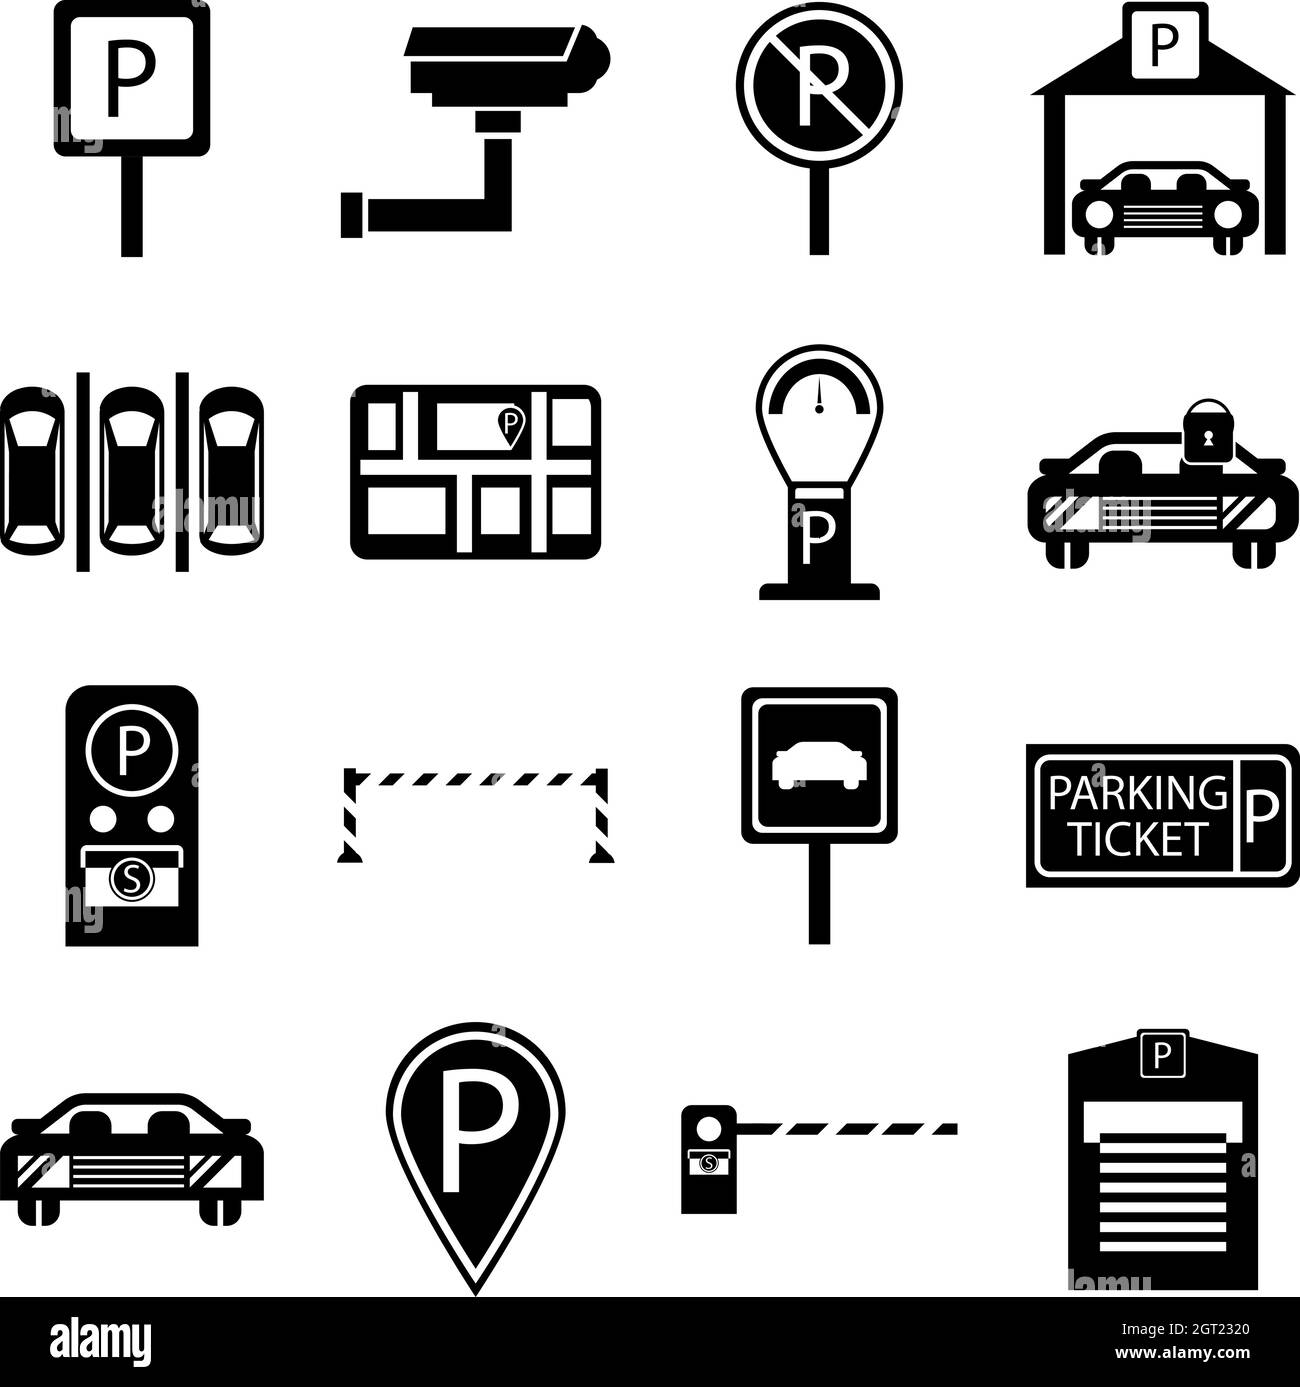 Car parking icons set, simple style Stock Vector